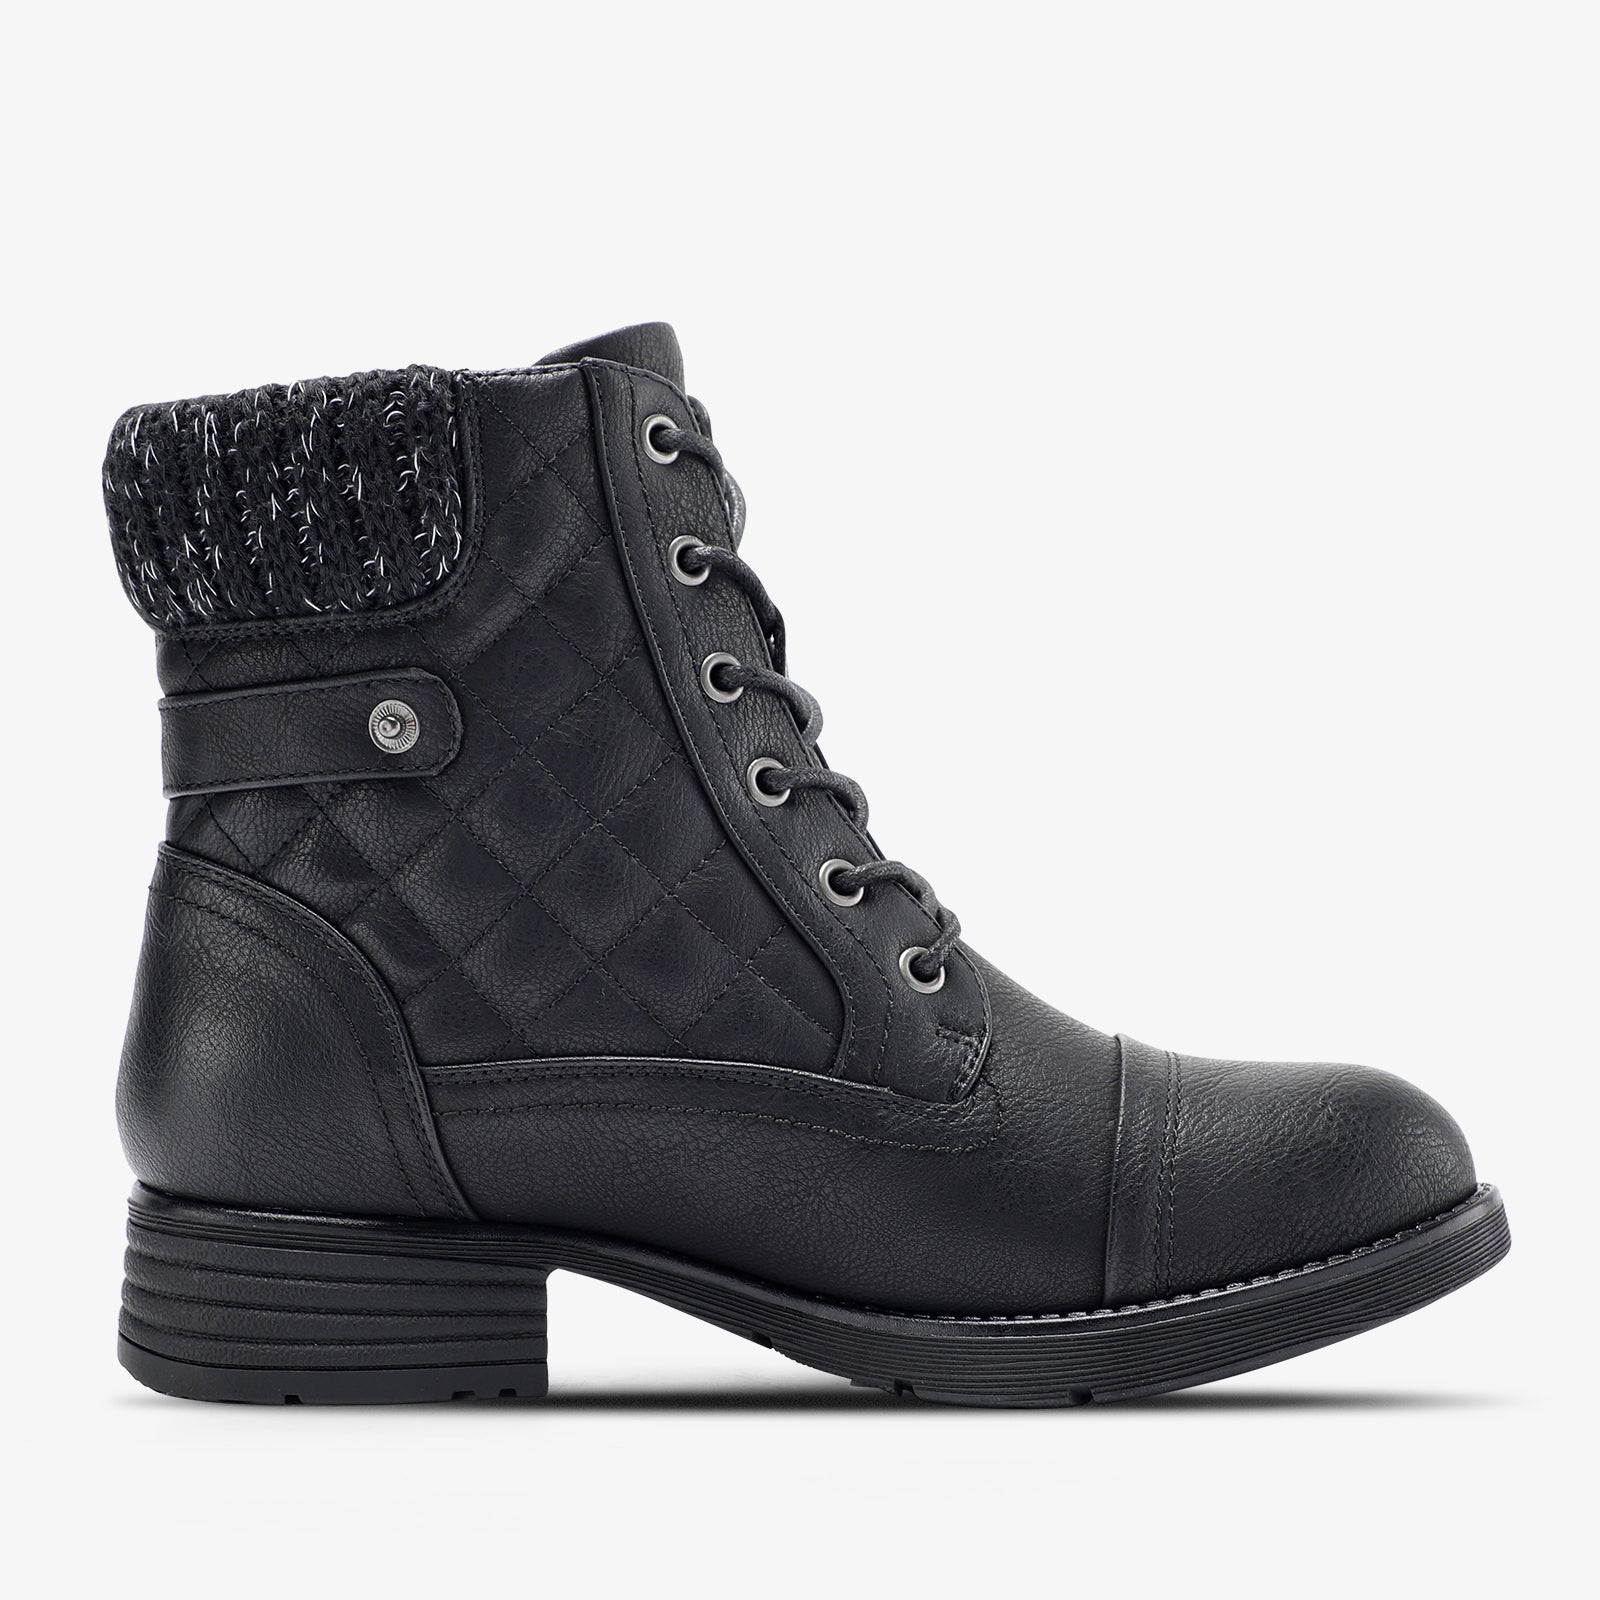 stq-womens-combat-boots-ankle-booties-product-view